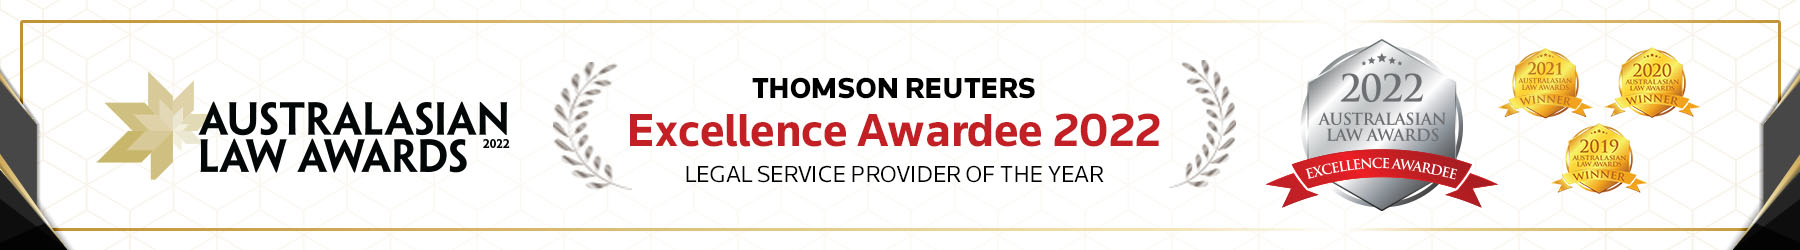 Thomson Reuters - Award 2022, Winners 2019,2020 & 2021 - Legal service provider of the year